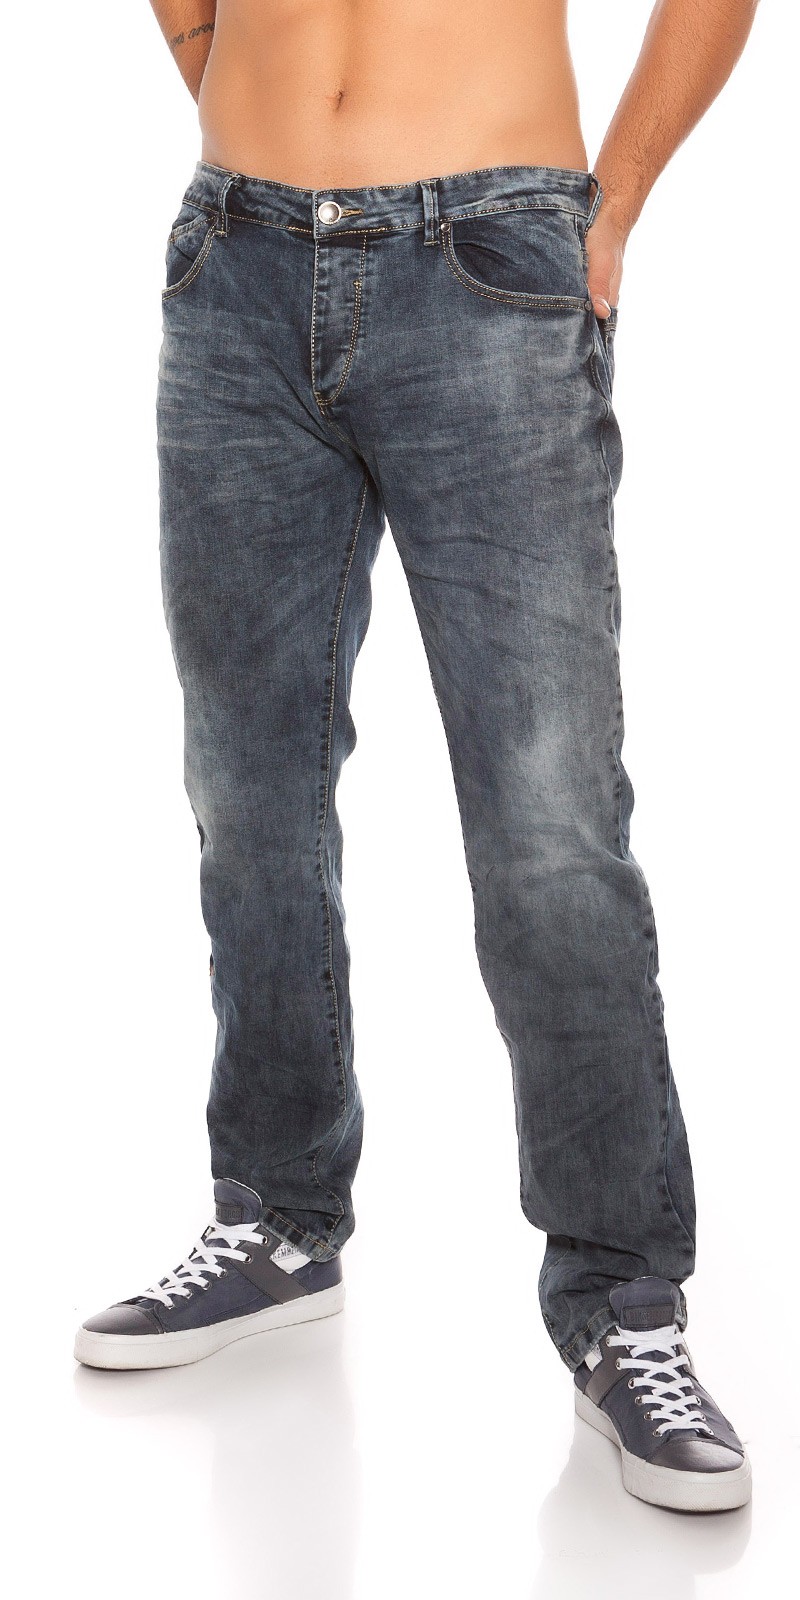 Jeans masculinos 7